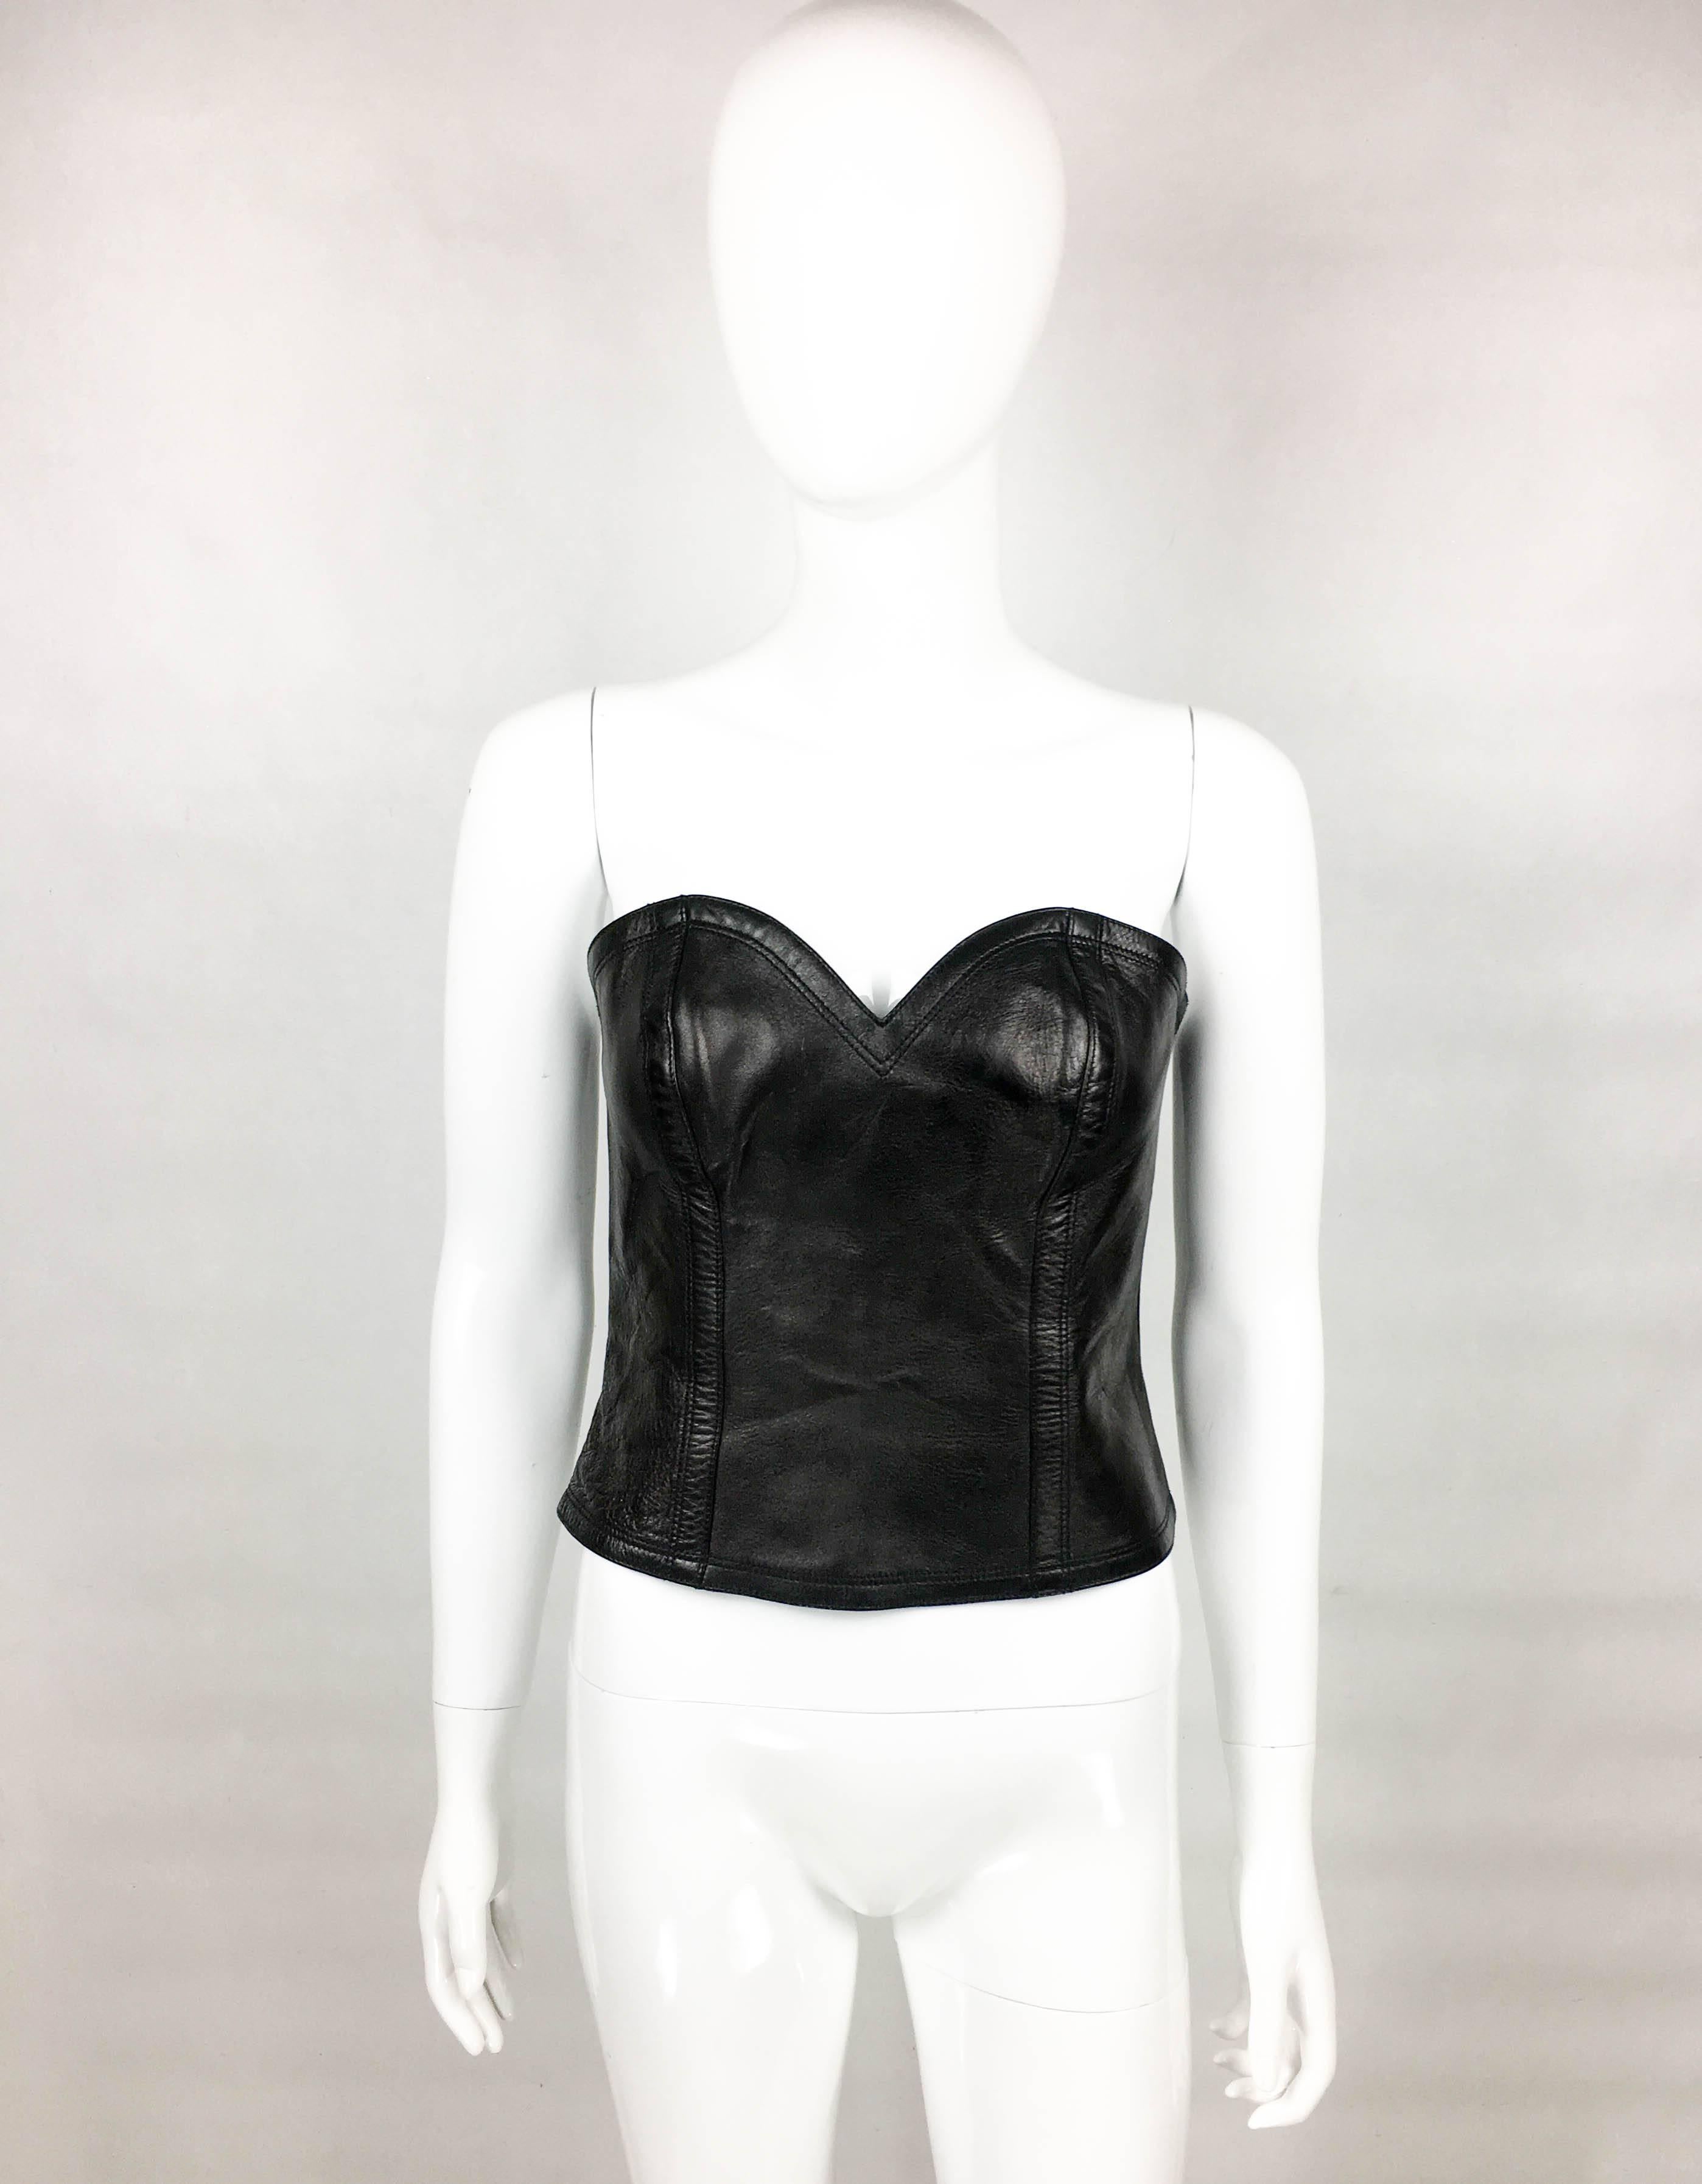 Unworn Yves Saint Laurent Runway Look Black Leather Bustier. This very sexy piece by Yves Saint Laurent was crafted for the 2009 Fall Winter Collection. An identical piece can be seen on the runway show (please refer to photos). It is made in black